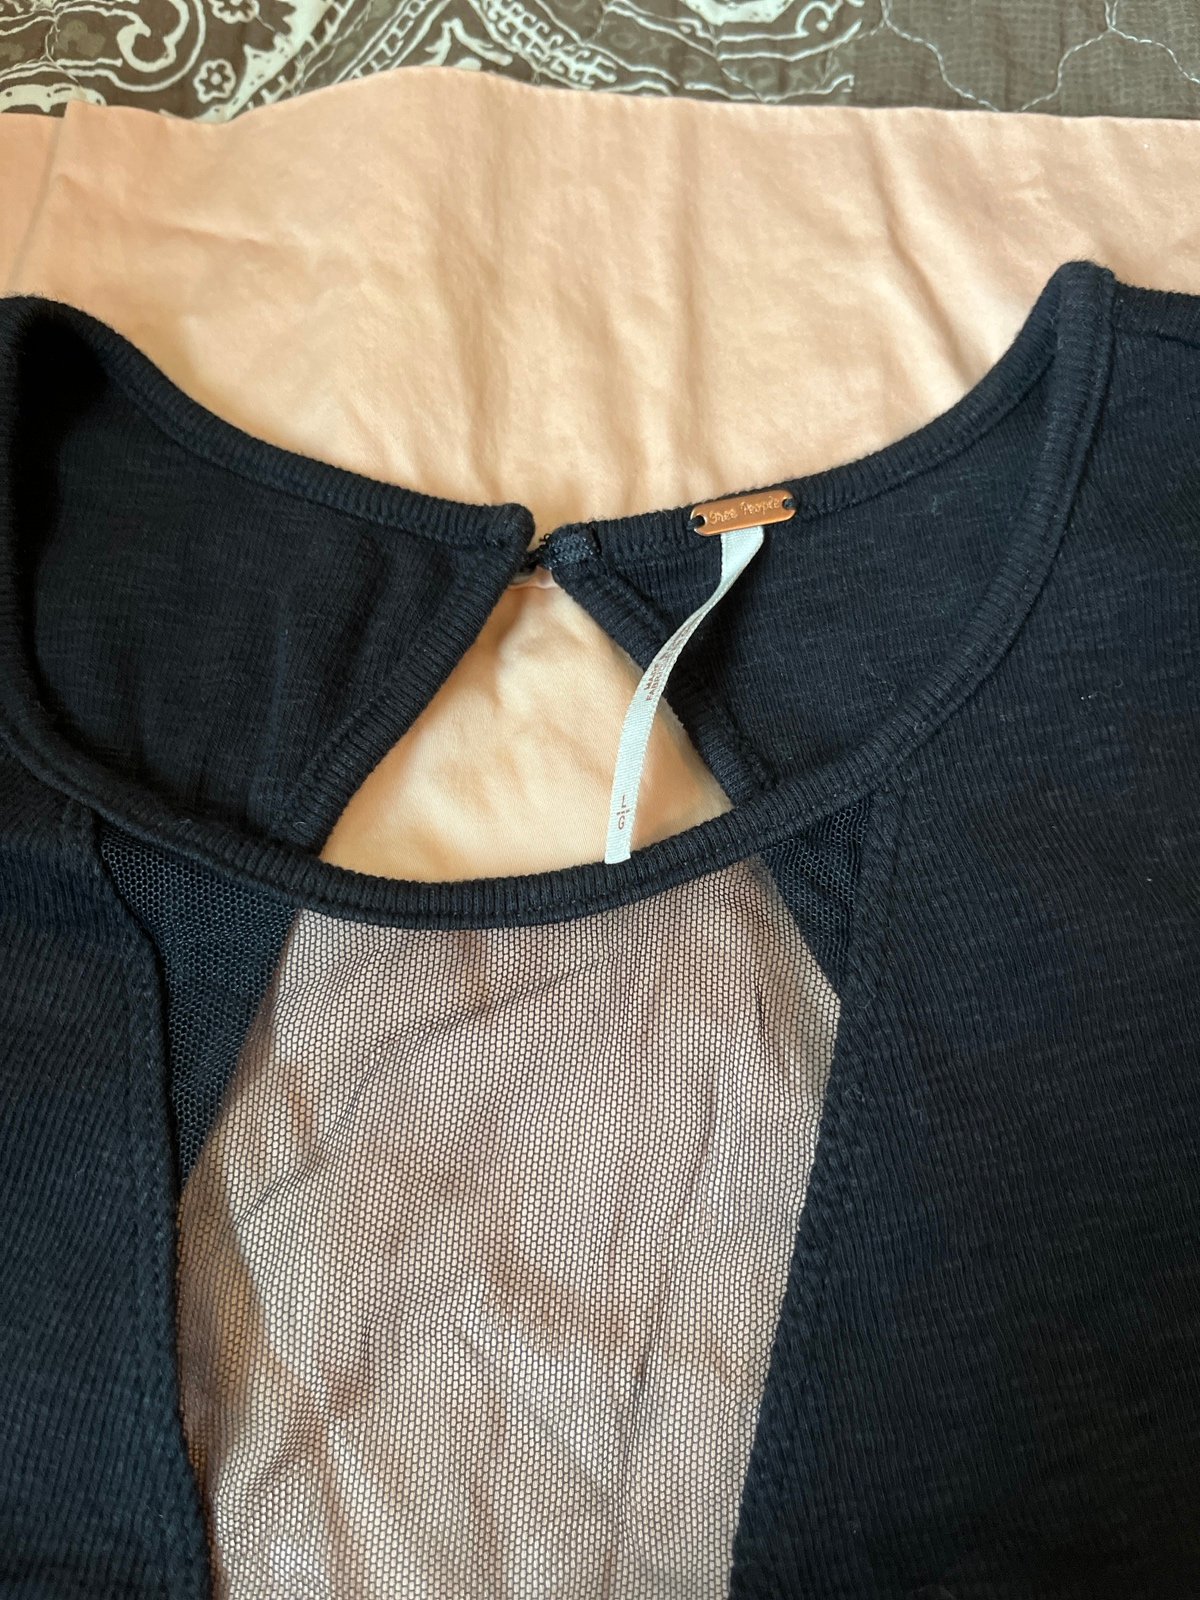 cheapest place to buy  Black Free People top v neck mesh tank L womans knit MLZjbOcqC Counter Genuine 